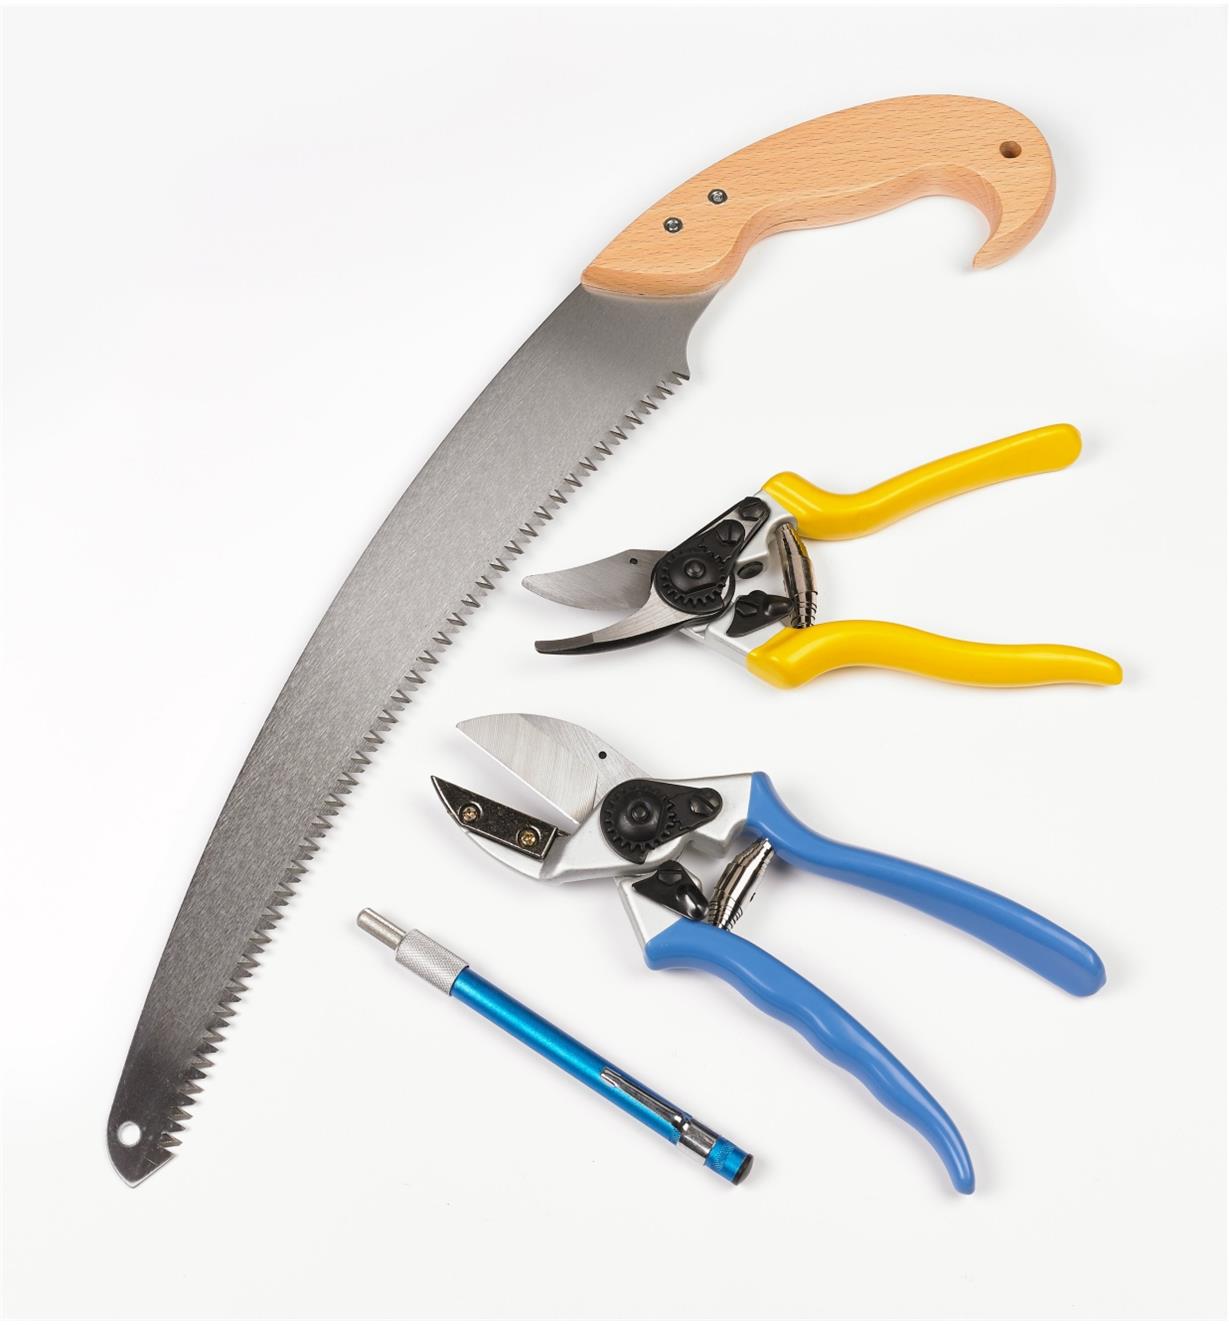 AB327 - Complete Pruning Kit